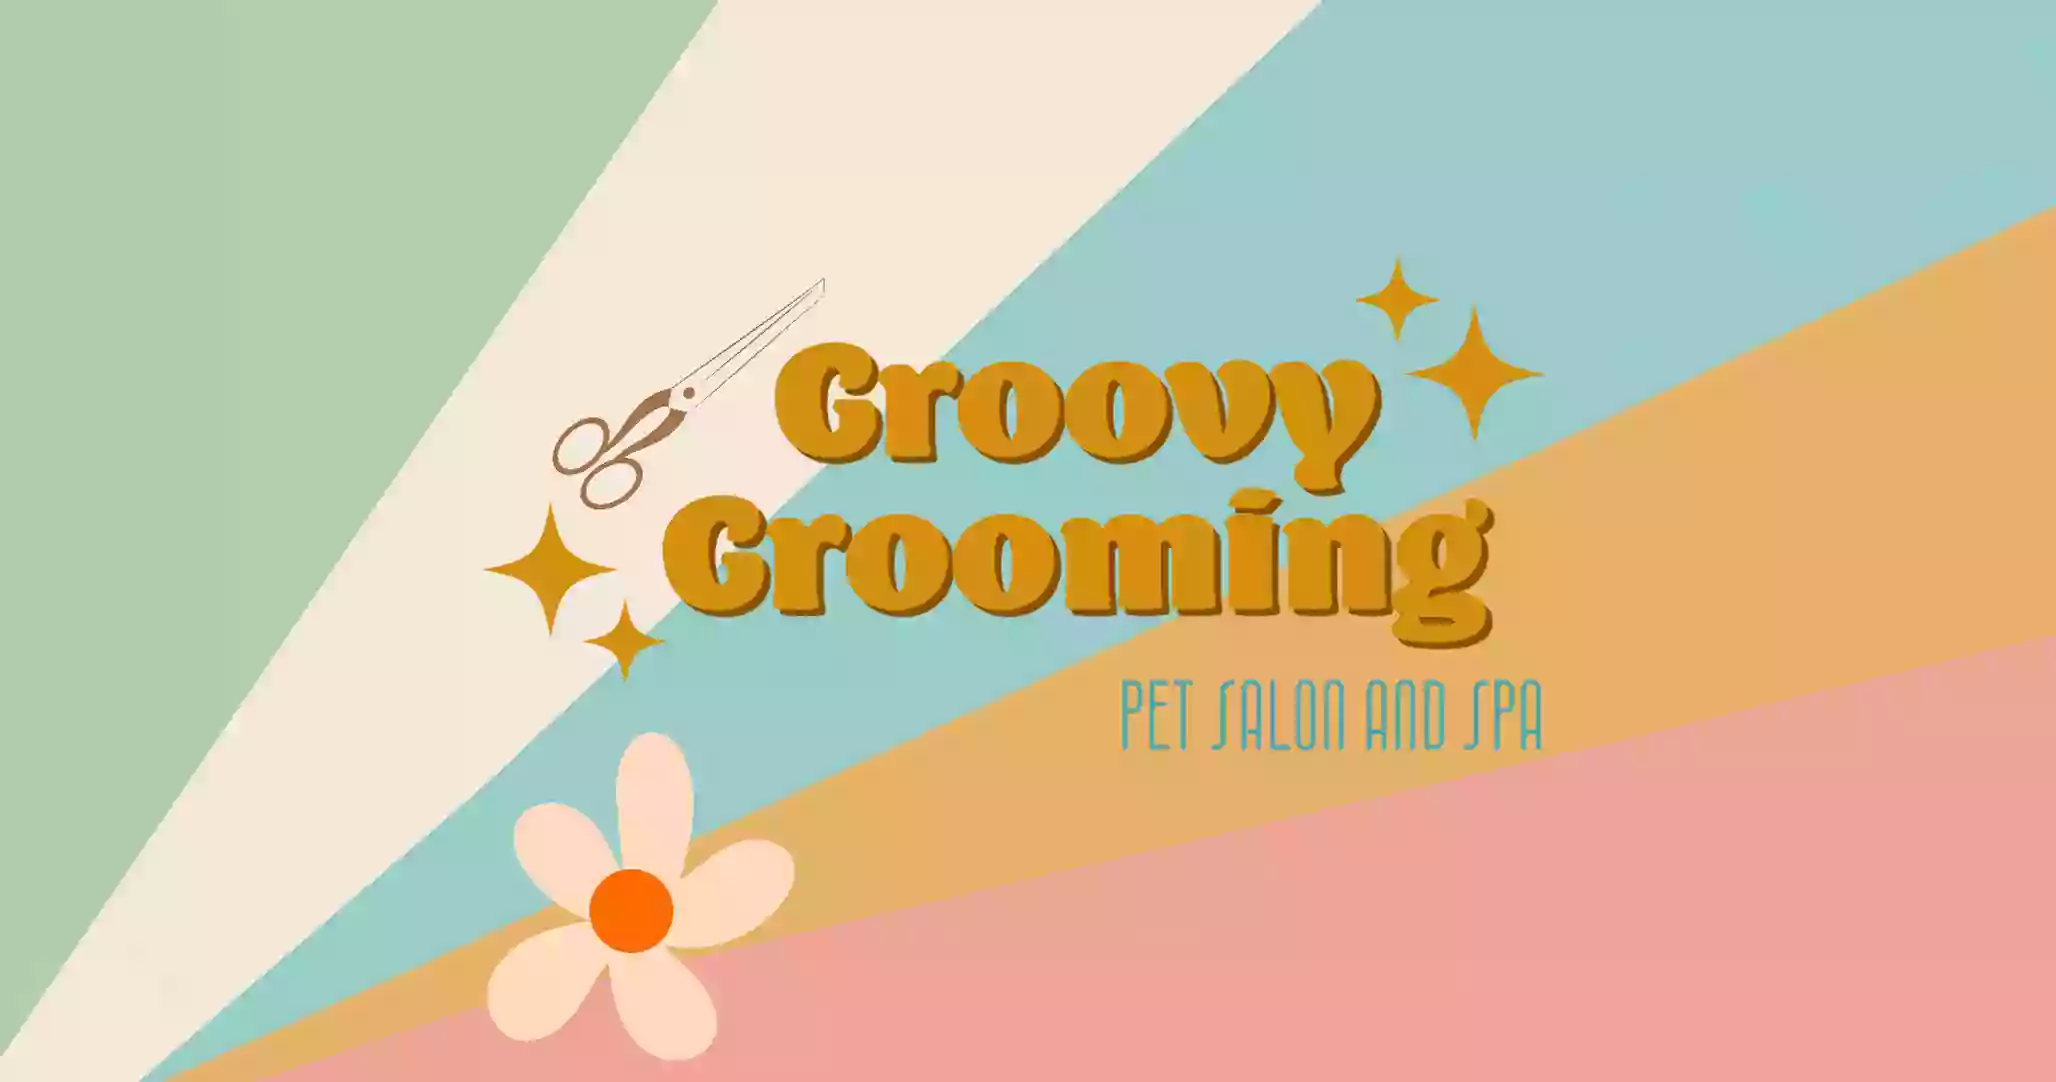 Groovy Grooming Pet Salon and Spa